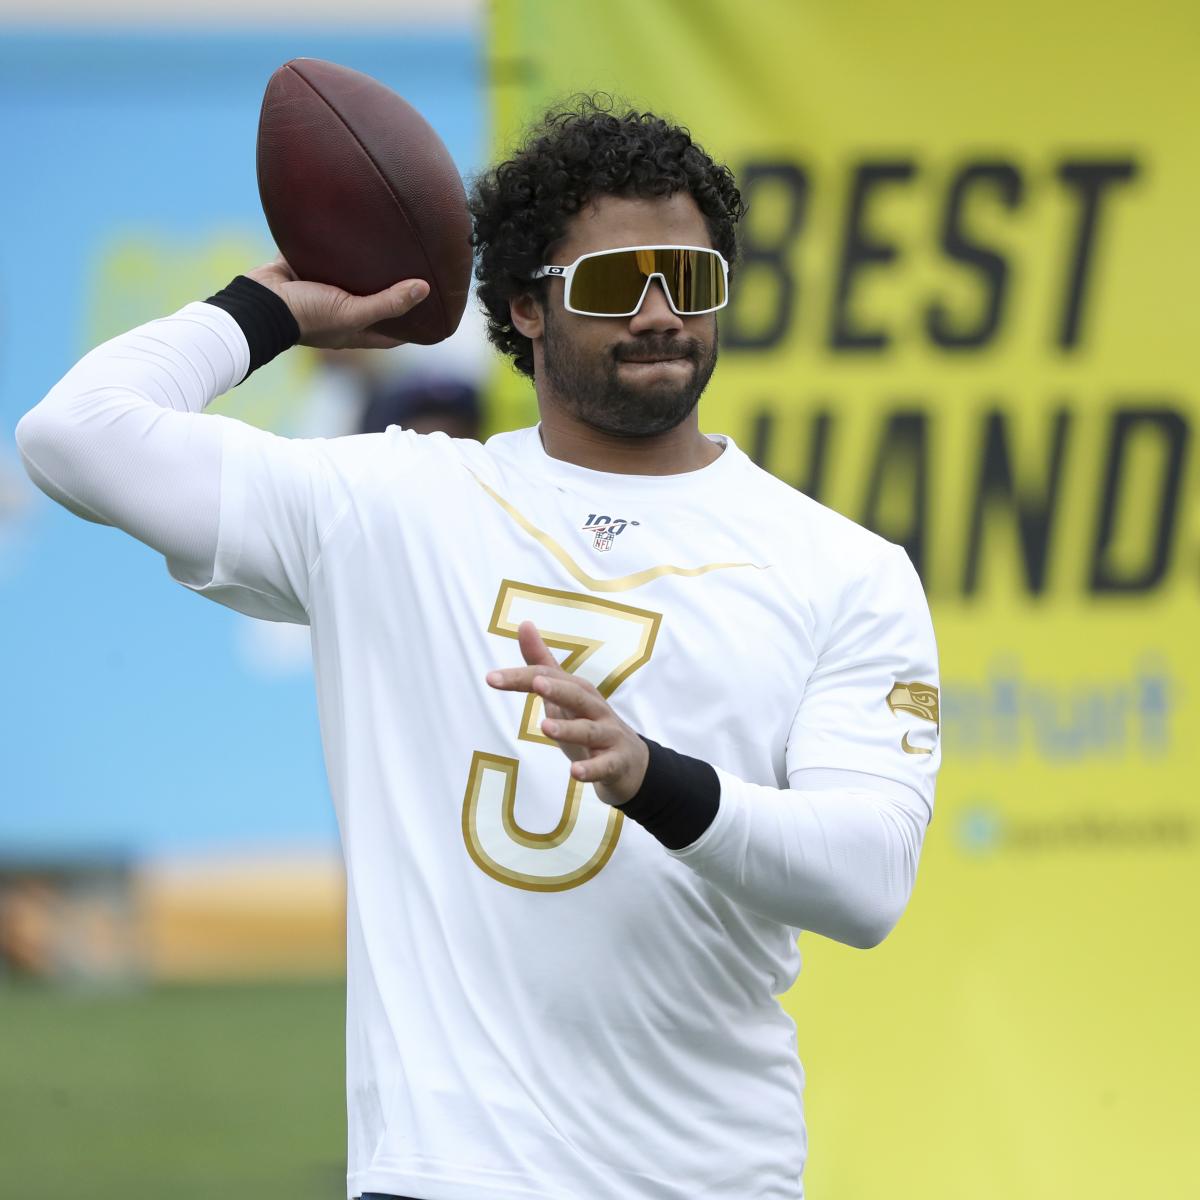 Pro Bowl 2020 Rosters, Jerseys, Odds and Predictions for NFL All